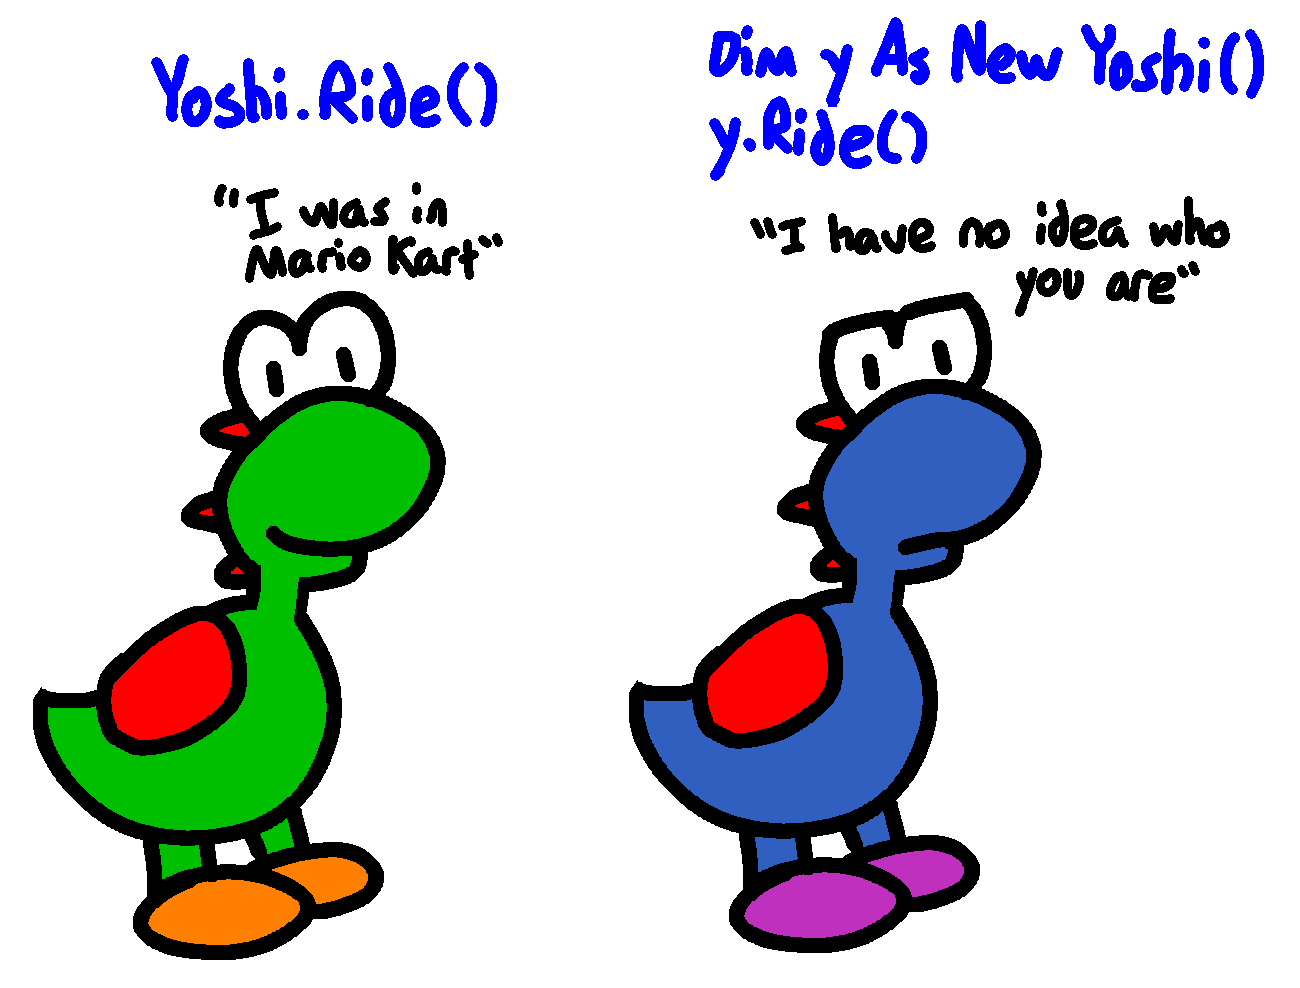 Singleton function call as green Yoshi ("I was inMario Kart"). New object as blue Yoshi ("I have no idea who you are").